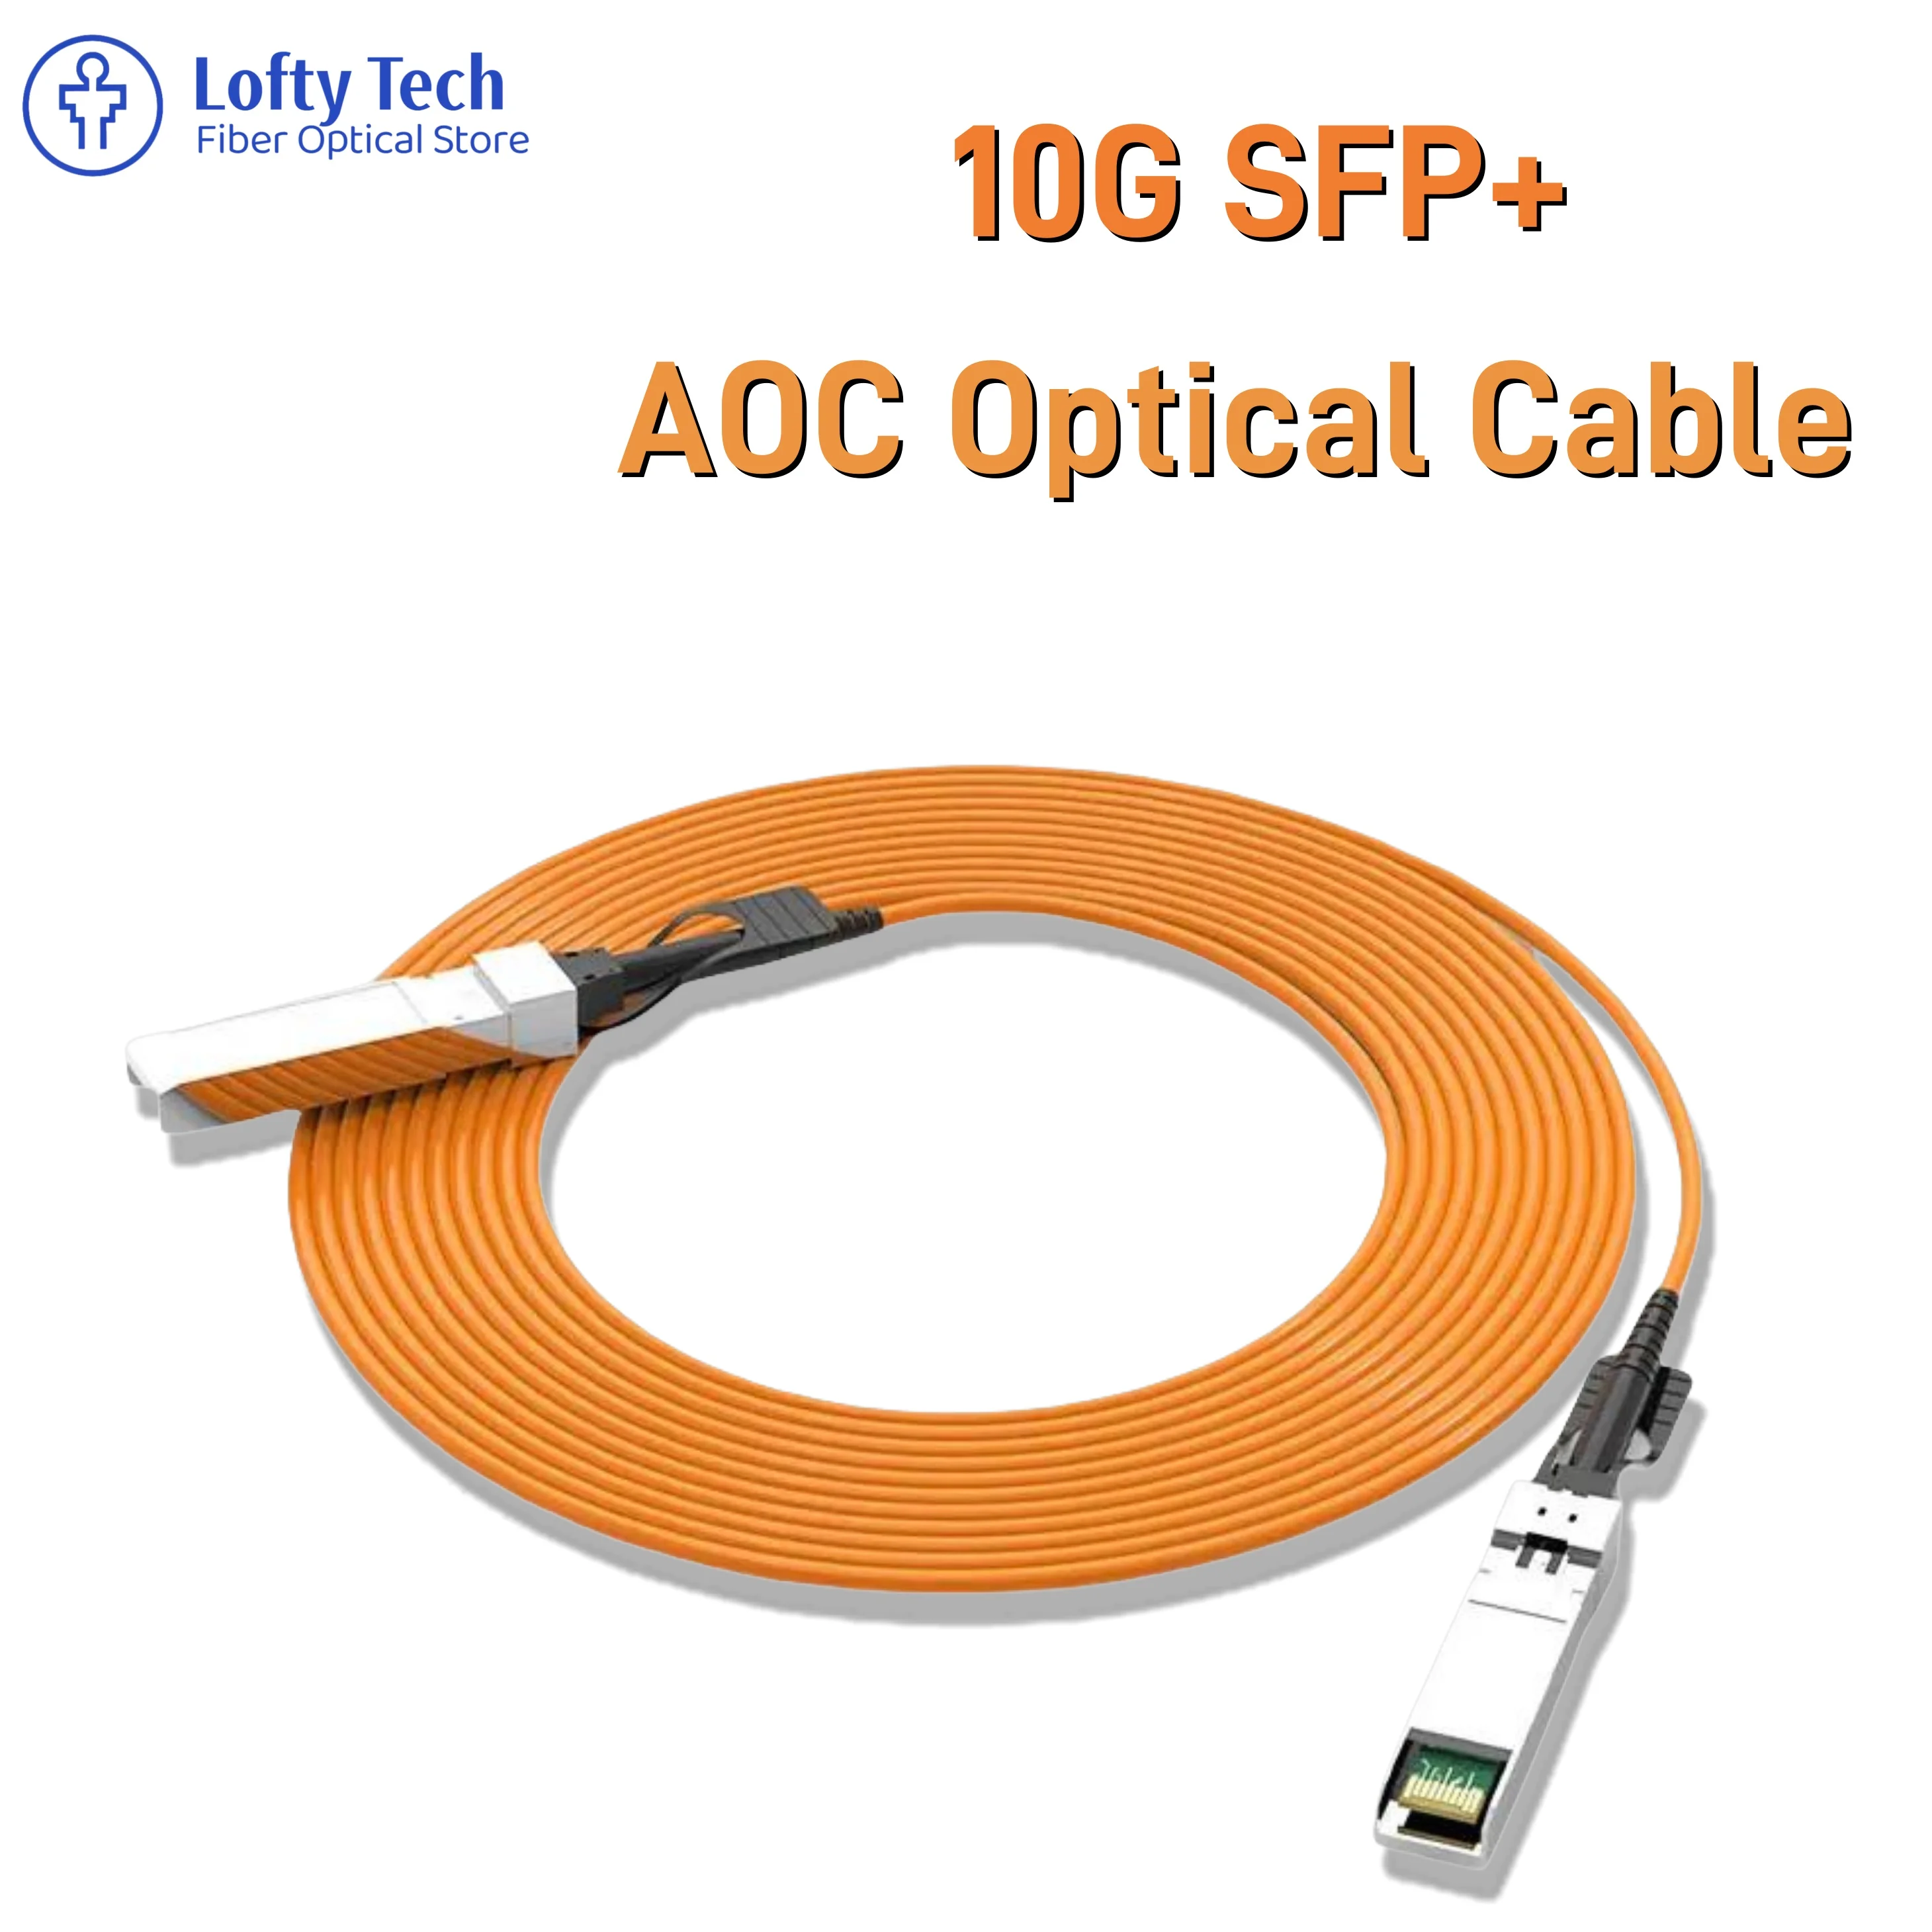 

10G SFP Active Optical Cable for Switch, AOC Optical Cable, OM2, 3M, 5M, 7M, Fiber Optic Cable, Cisco, MikroTik, Ubiquiti etc. S